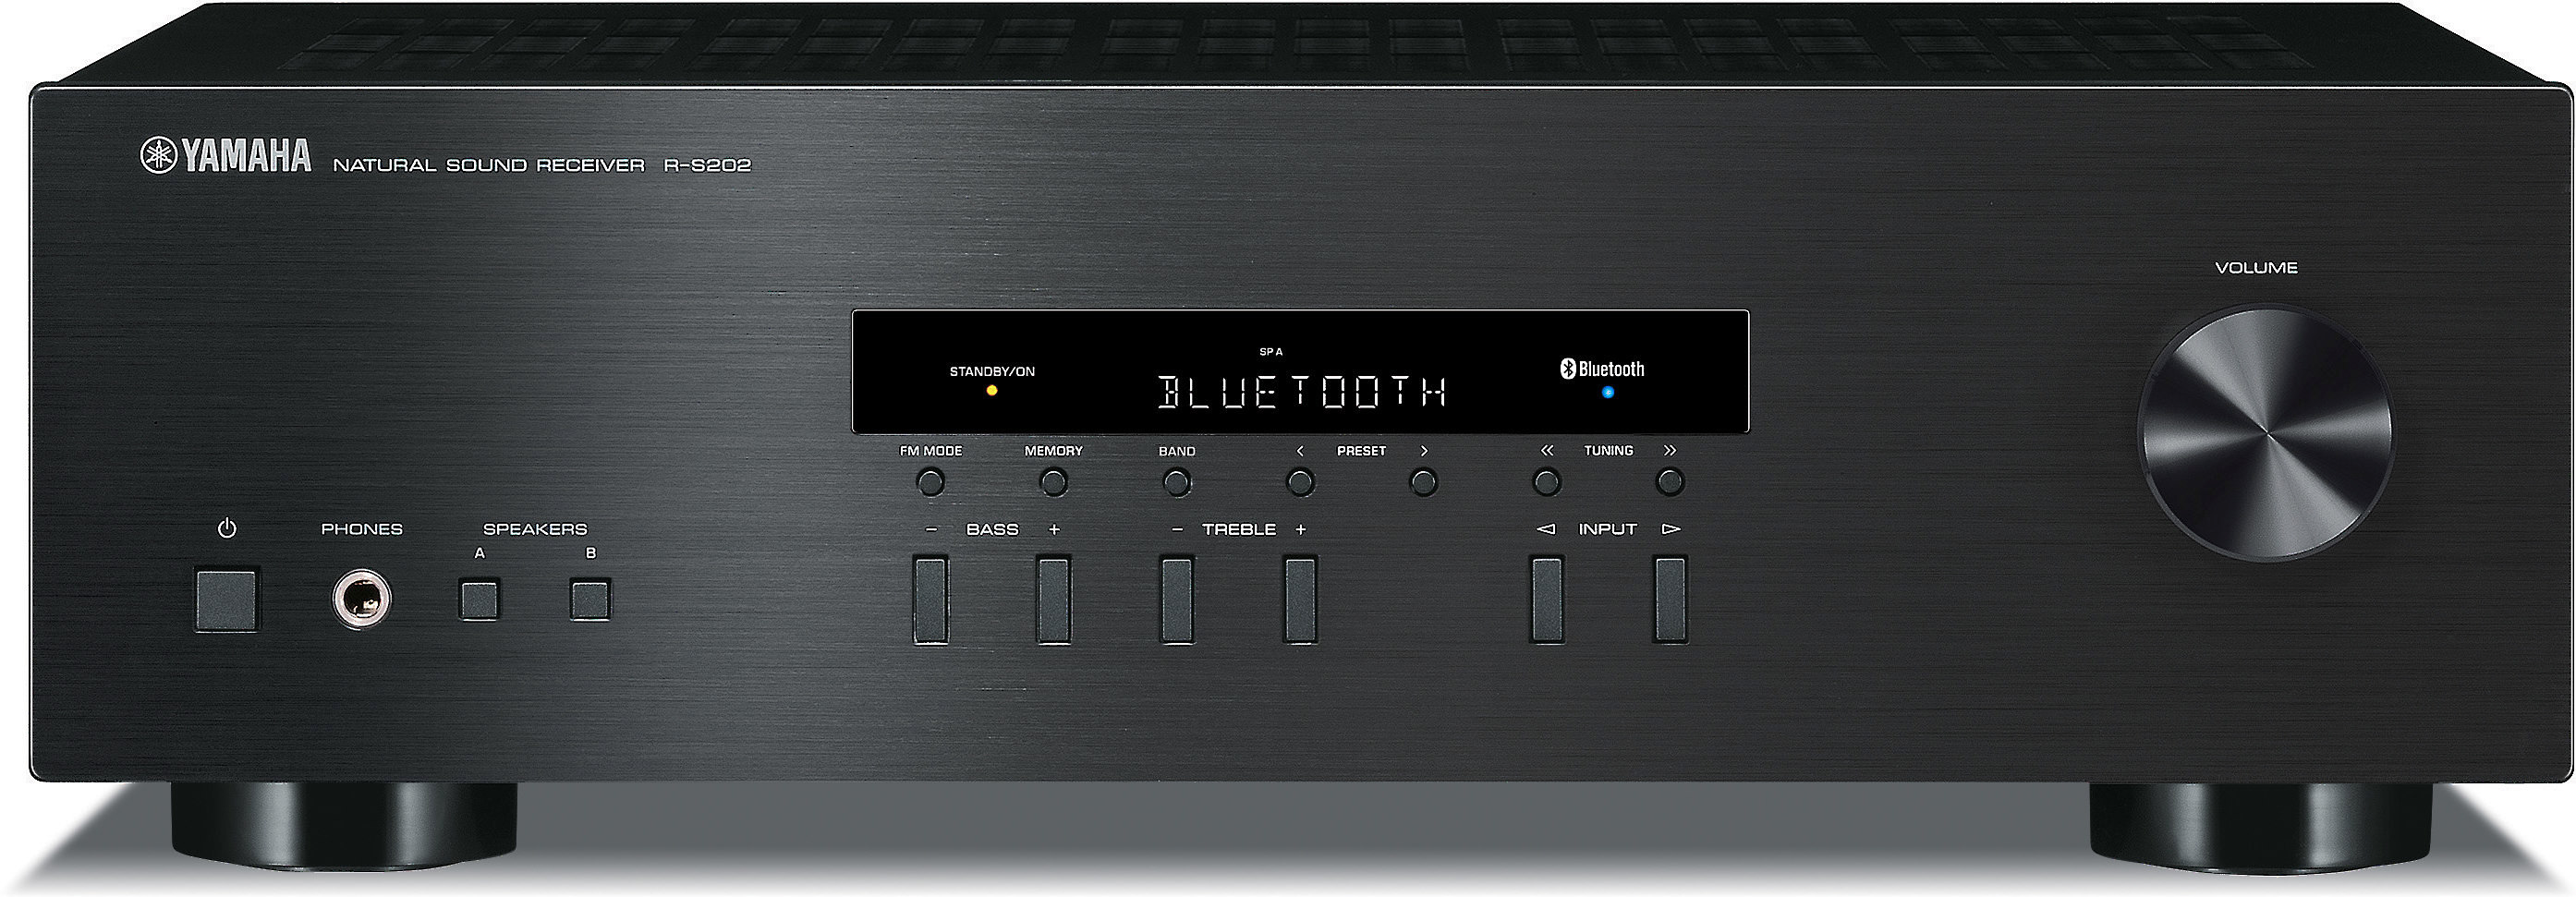 Customer Stereo with Yamaha R-S202 at Bluetooth® receiver Reviews: Crutchfield